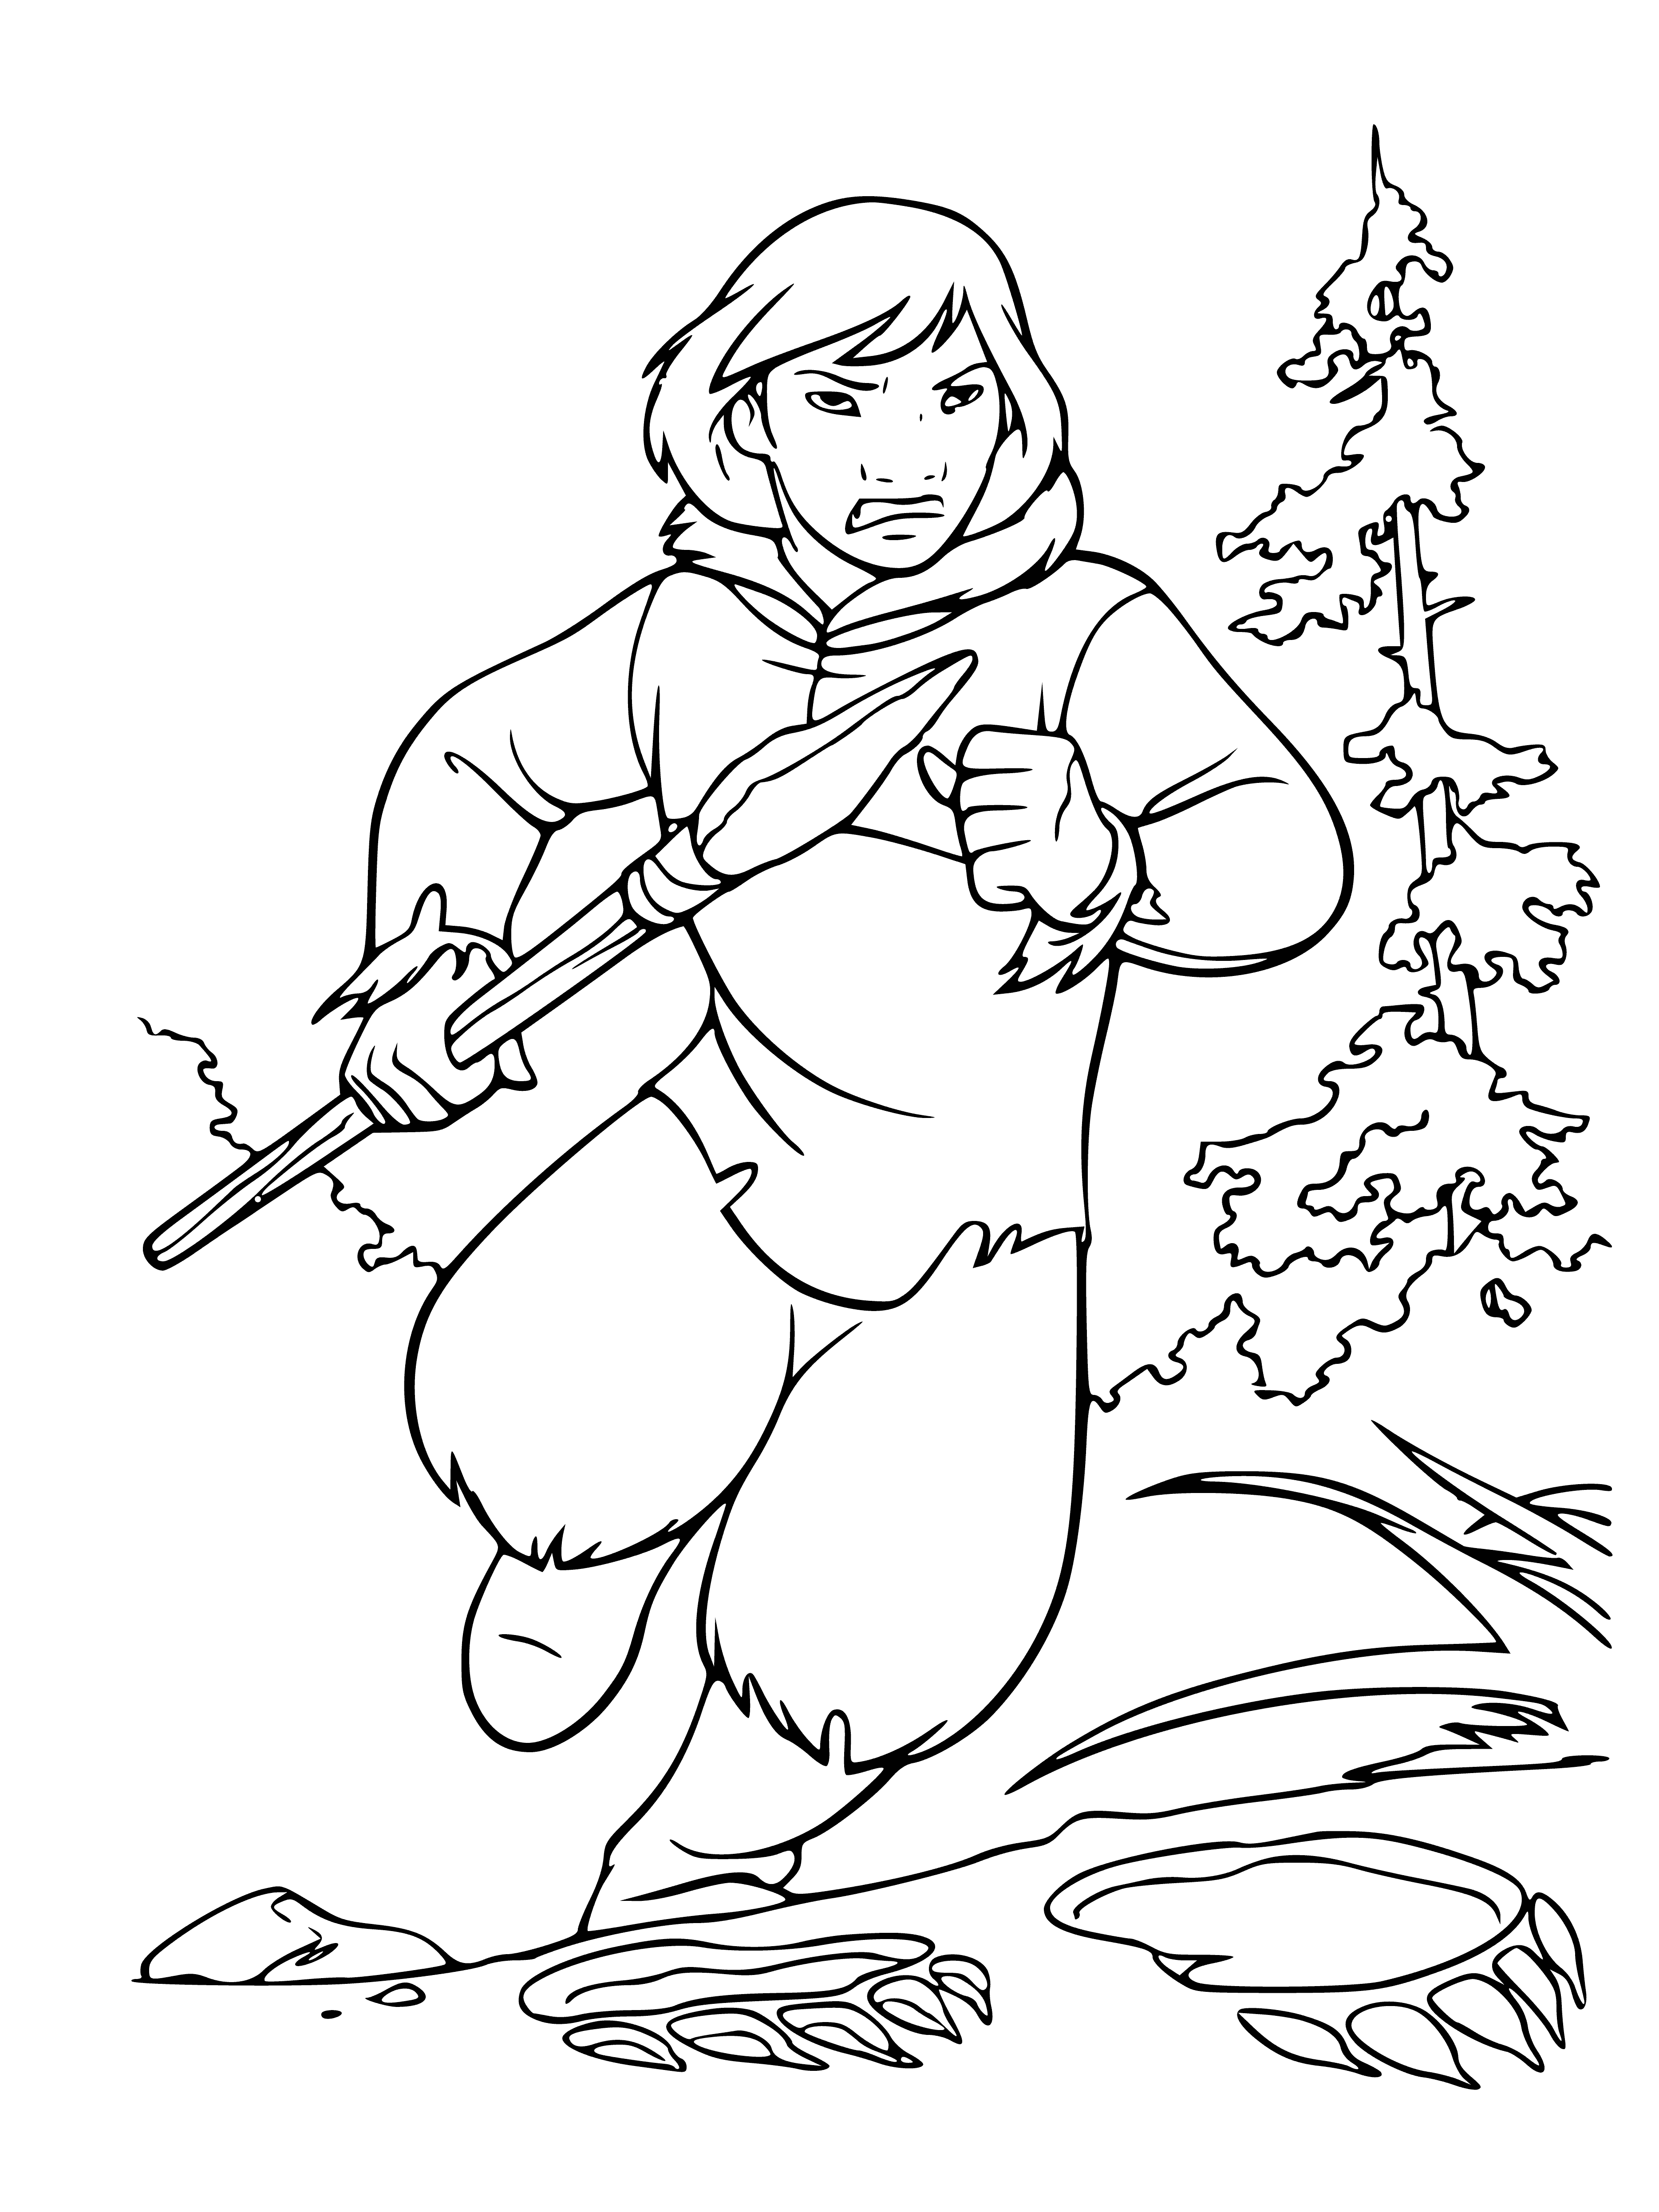 coloring page: Hunters on horseback chase a large bear through the woods, all armed with spears, ready to kill.